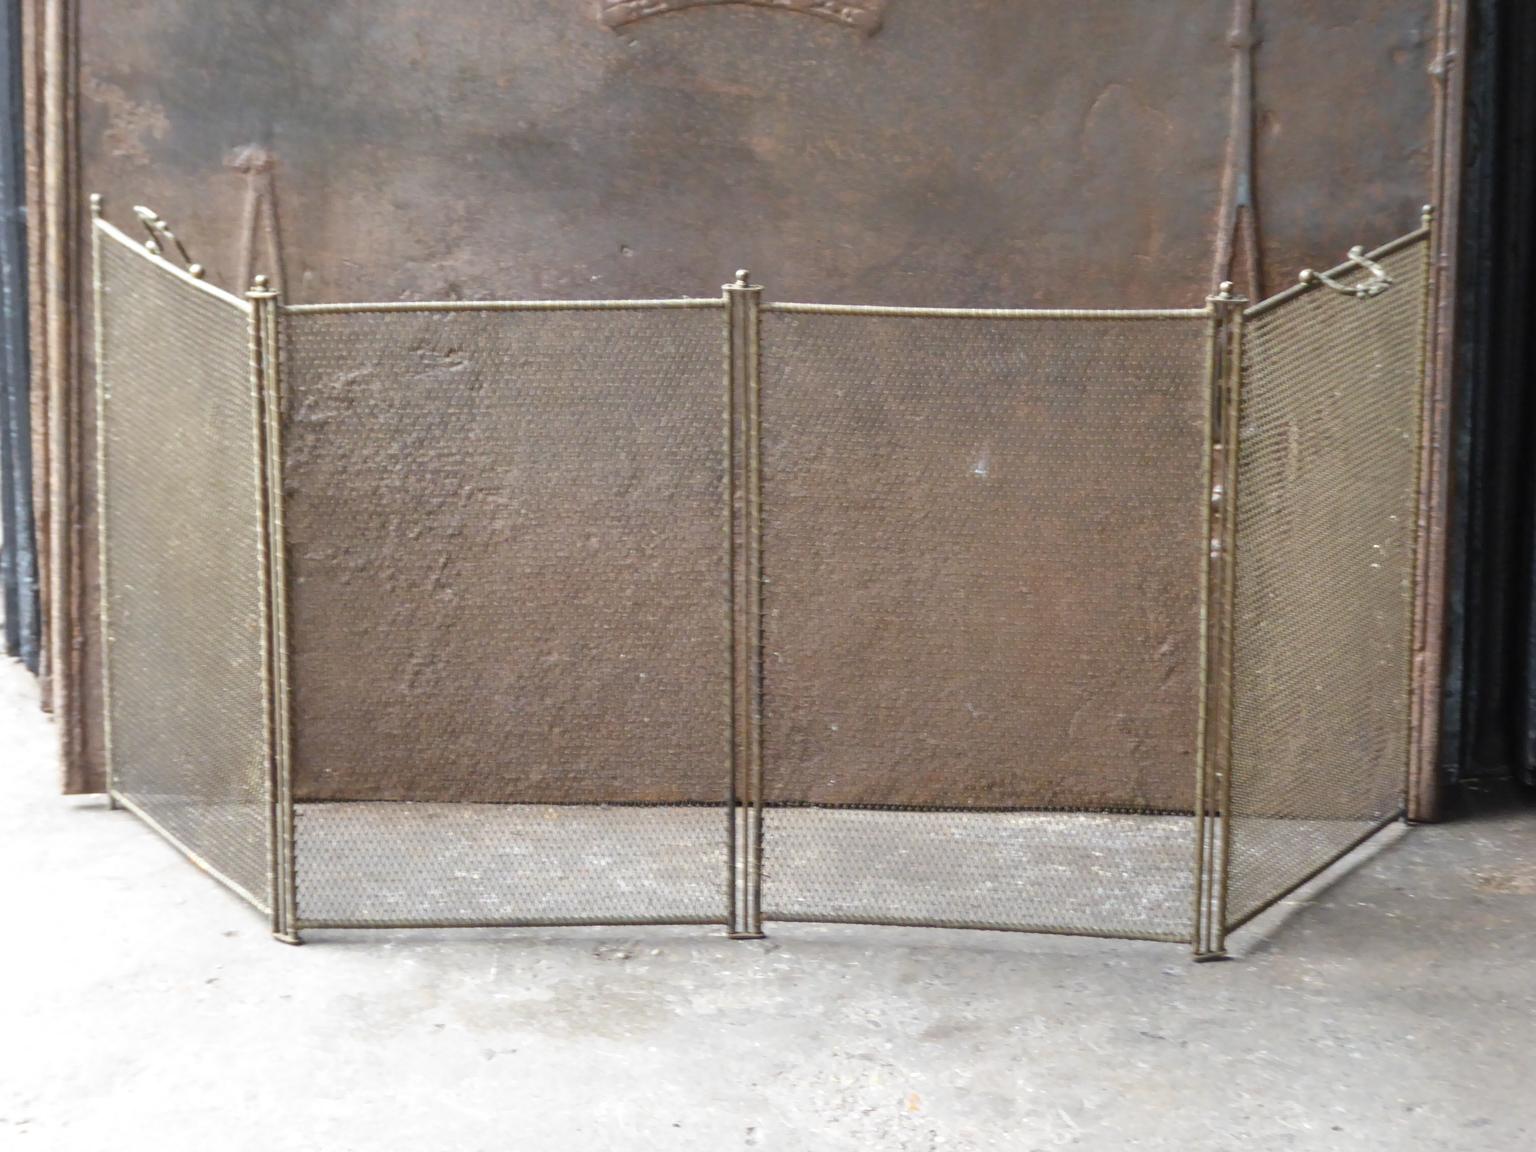 19th century French Napoleon III four-panel fireplace screen. The screen is made of brass and iron mesh. It is in a good condition and is fit for use in front of the fireplace.